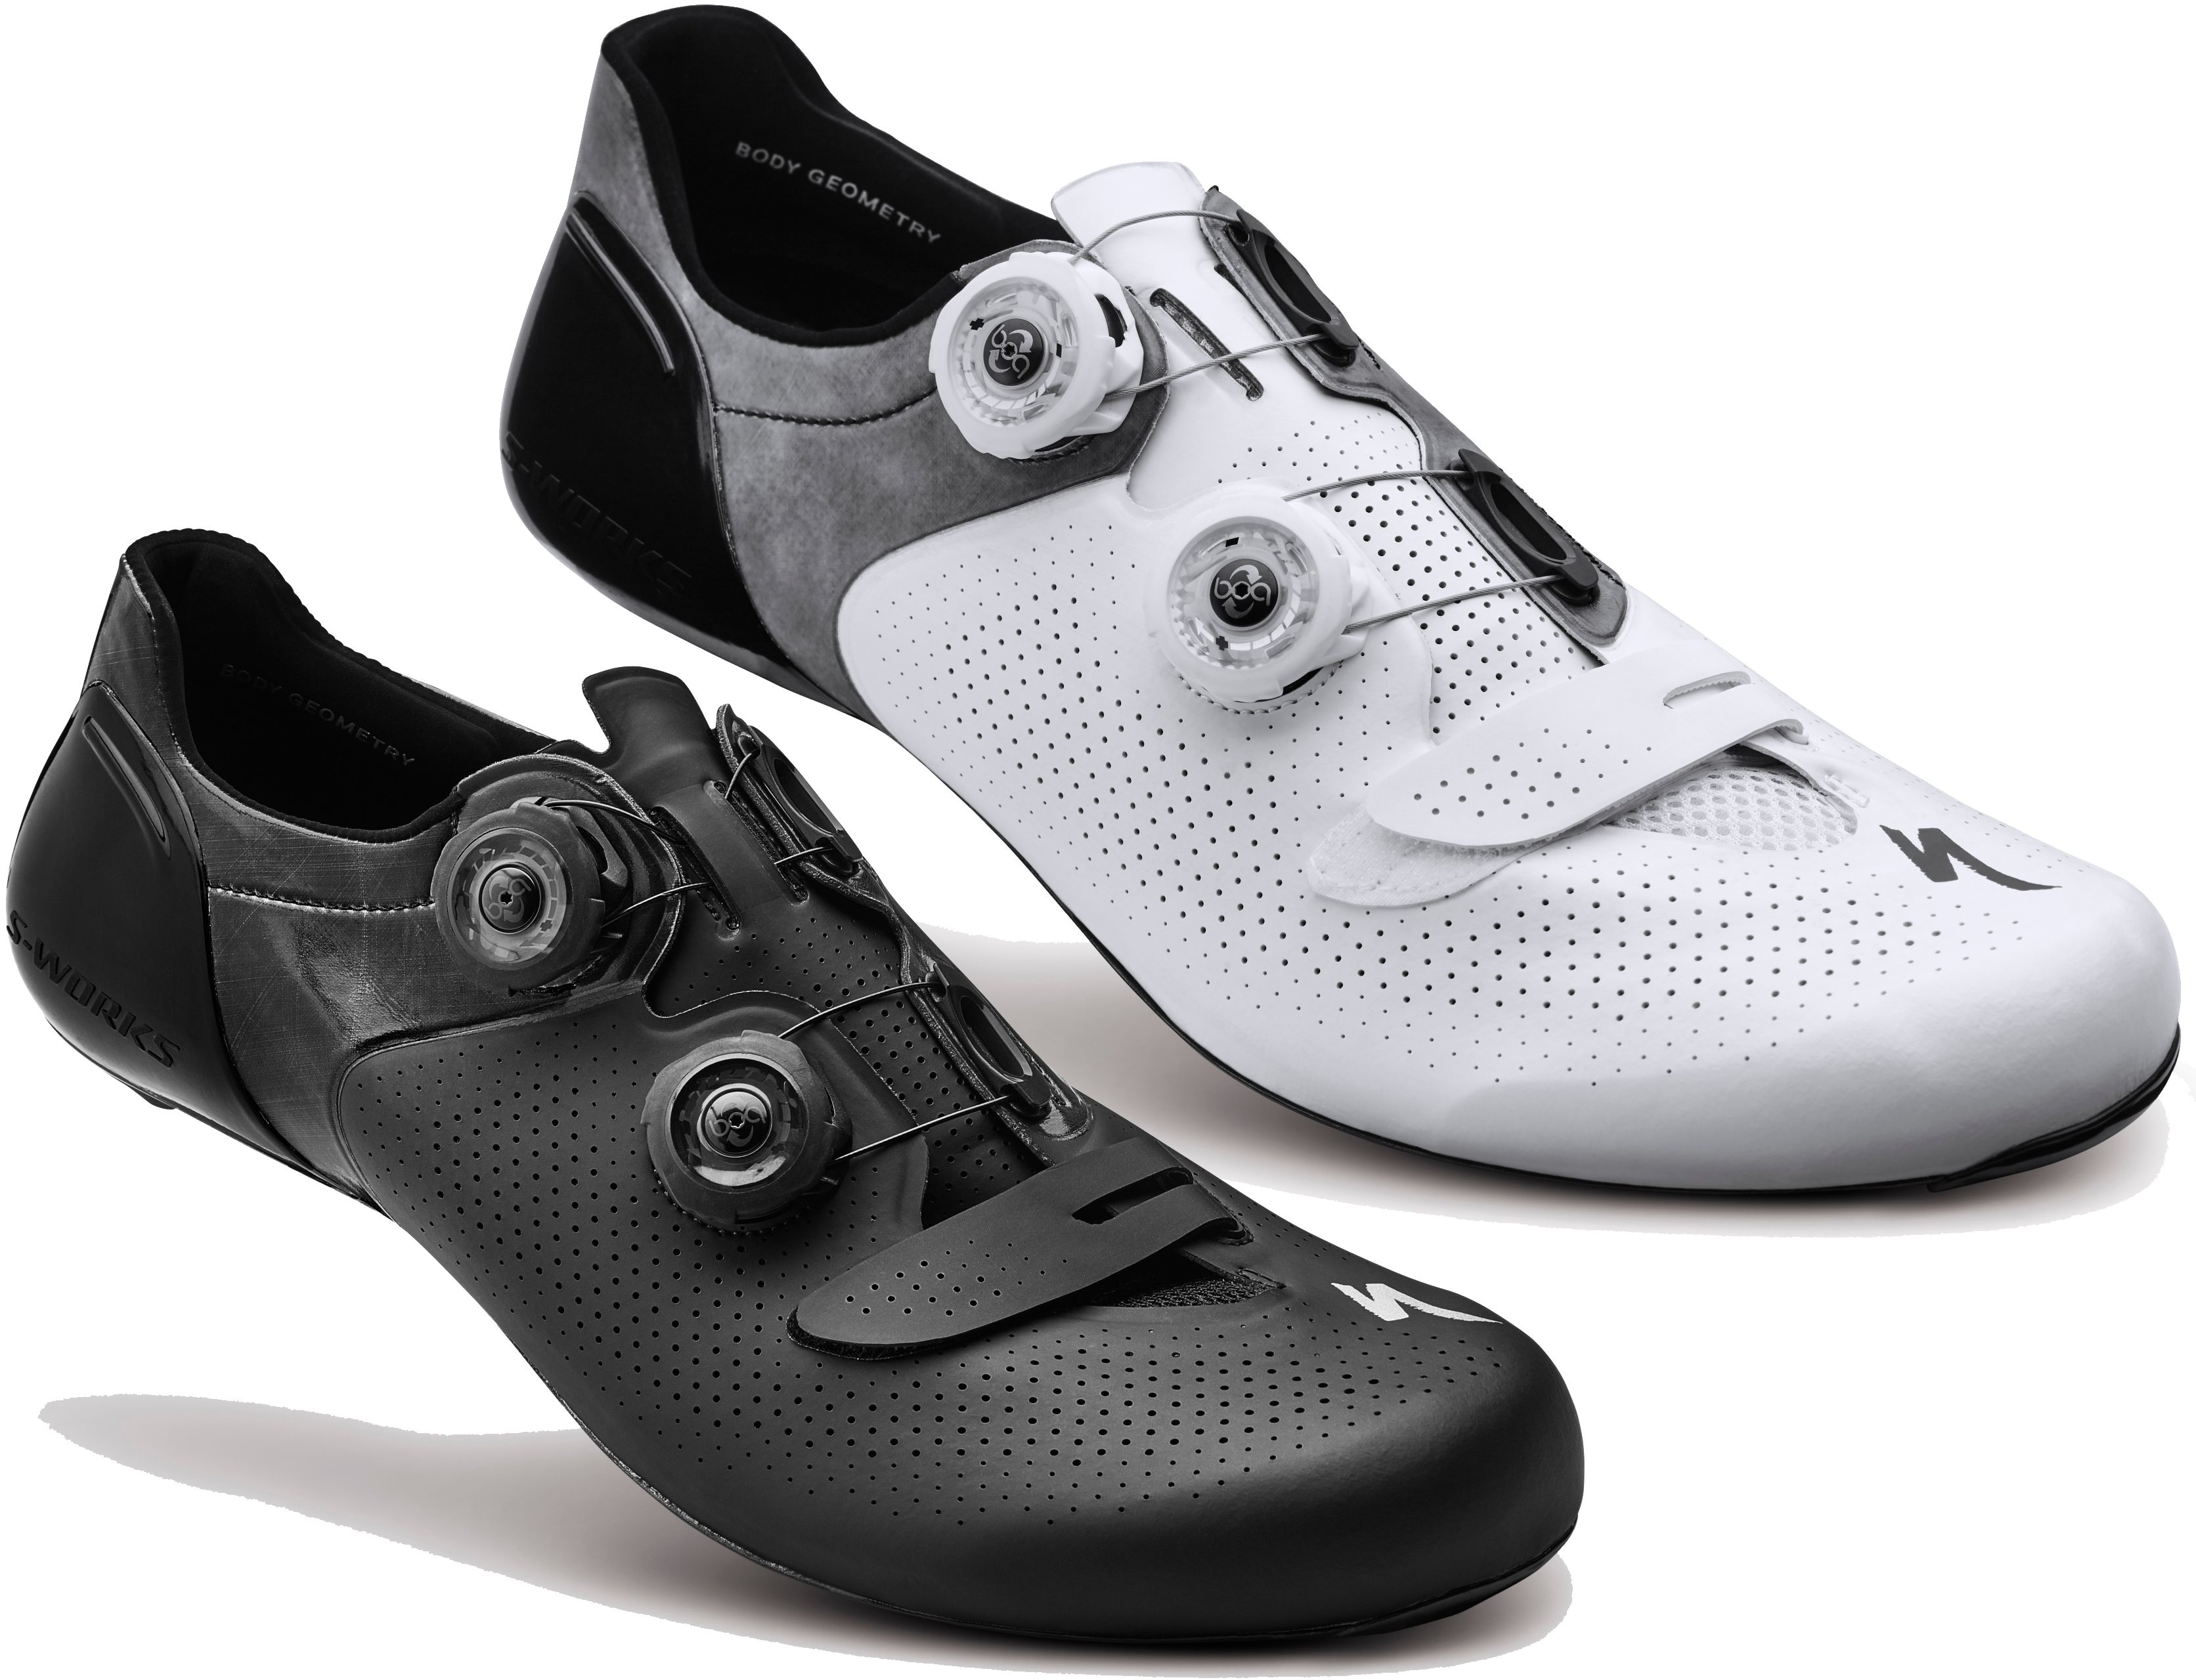 Specialized S-WORKS 6 Road Shoe - £185 